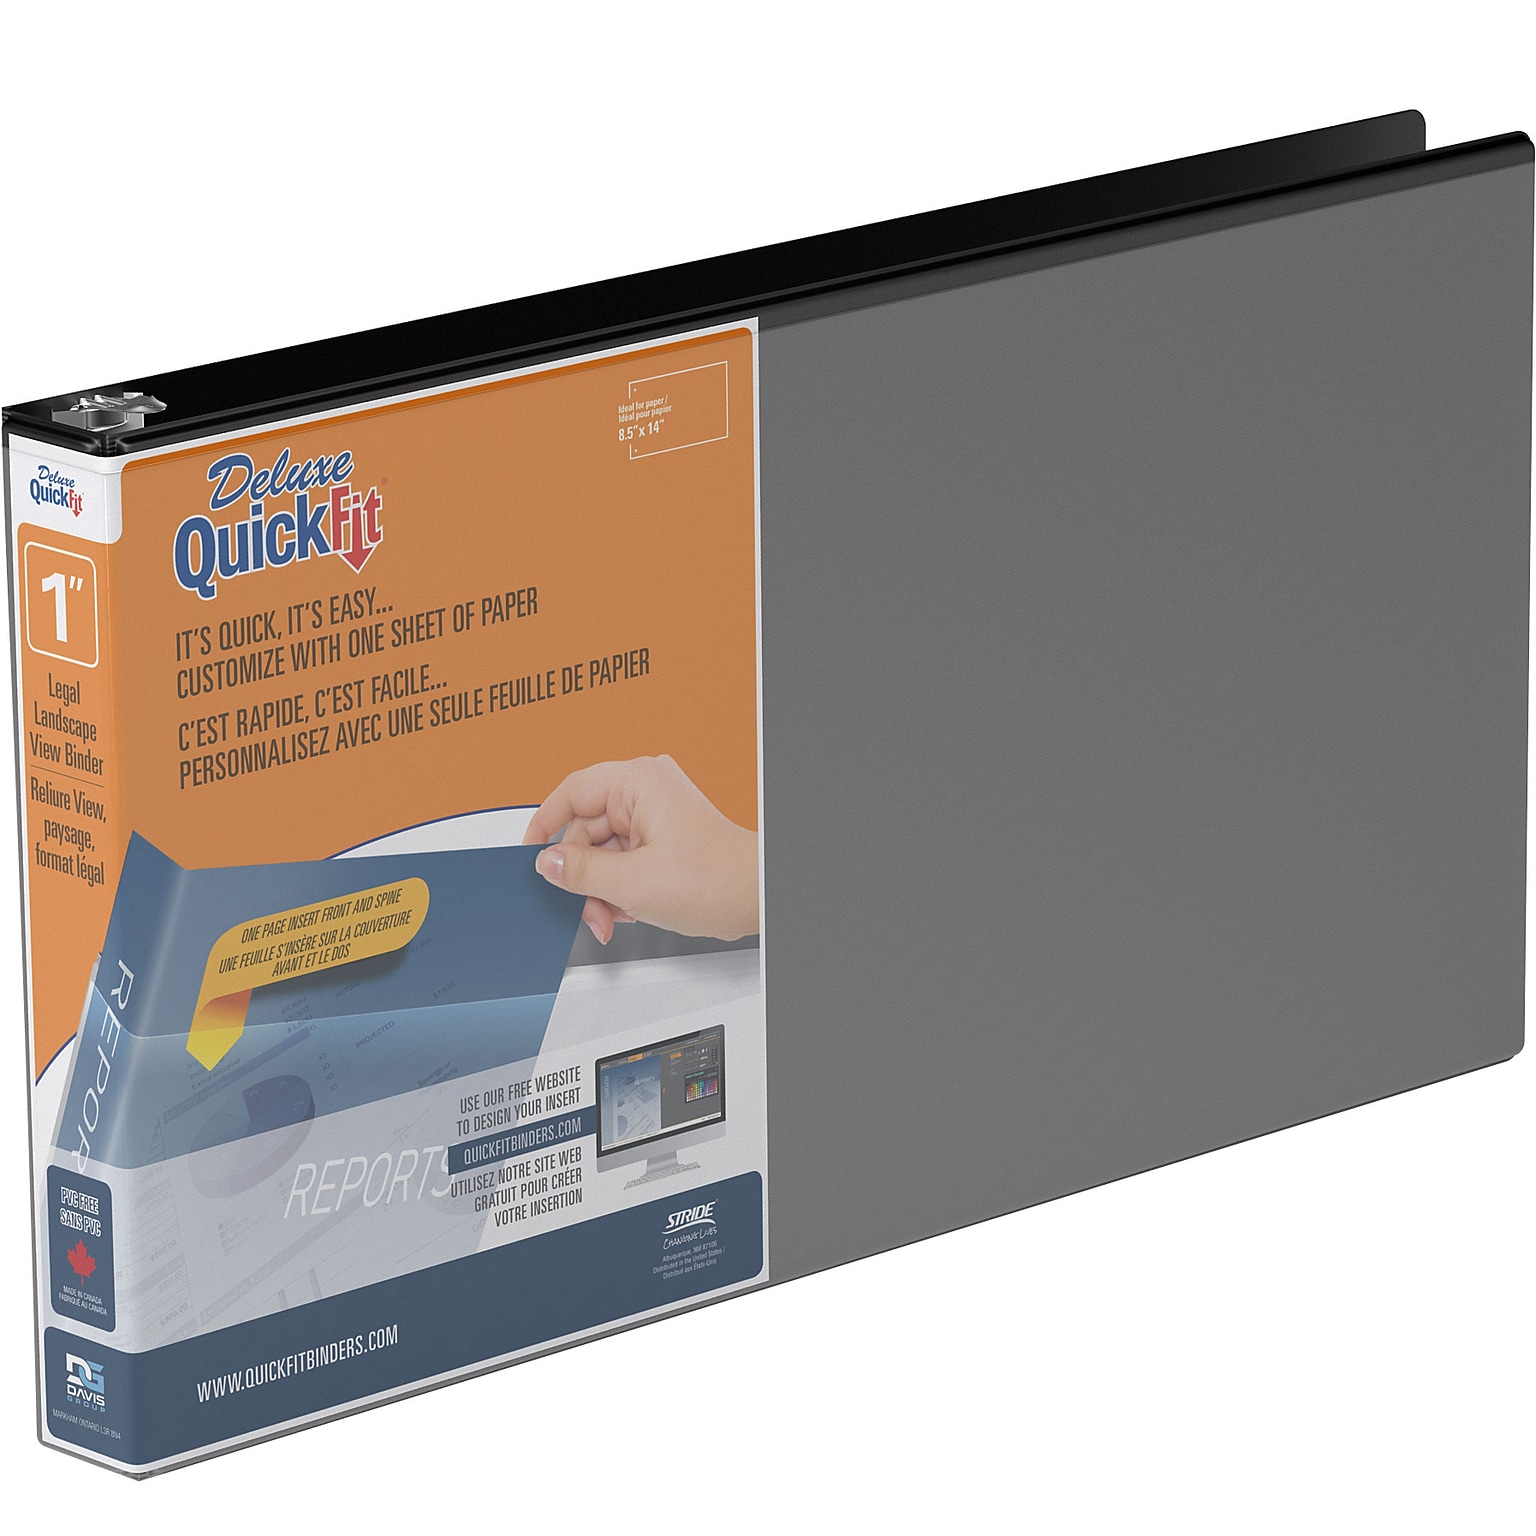 Stride QuickFit Heavy Duty 1 3-Ring View Binders, Black (95011L)